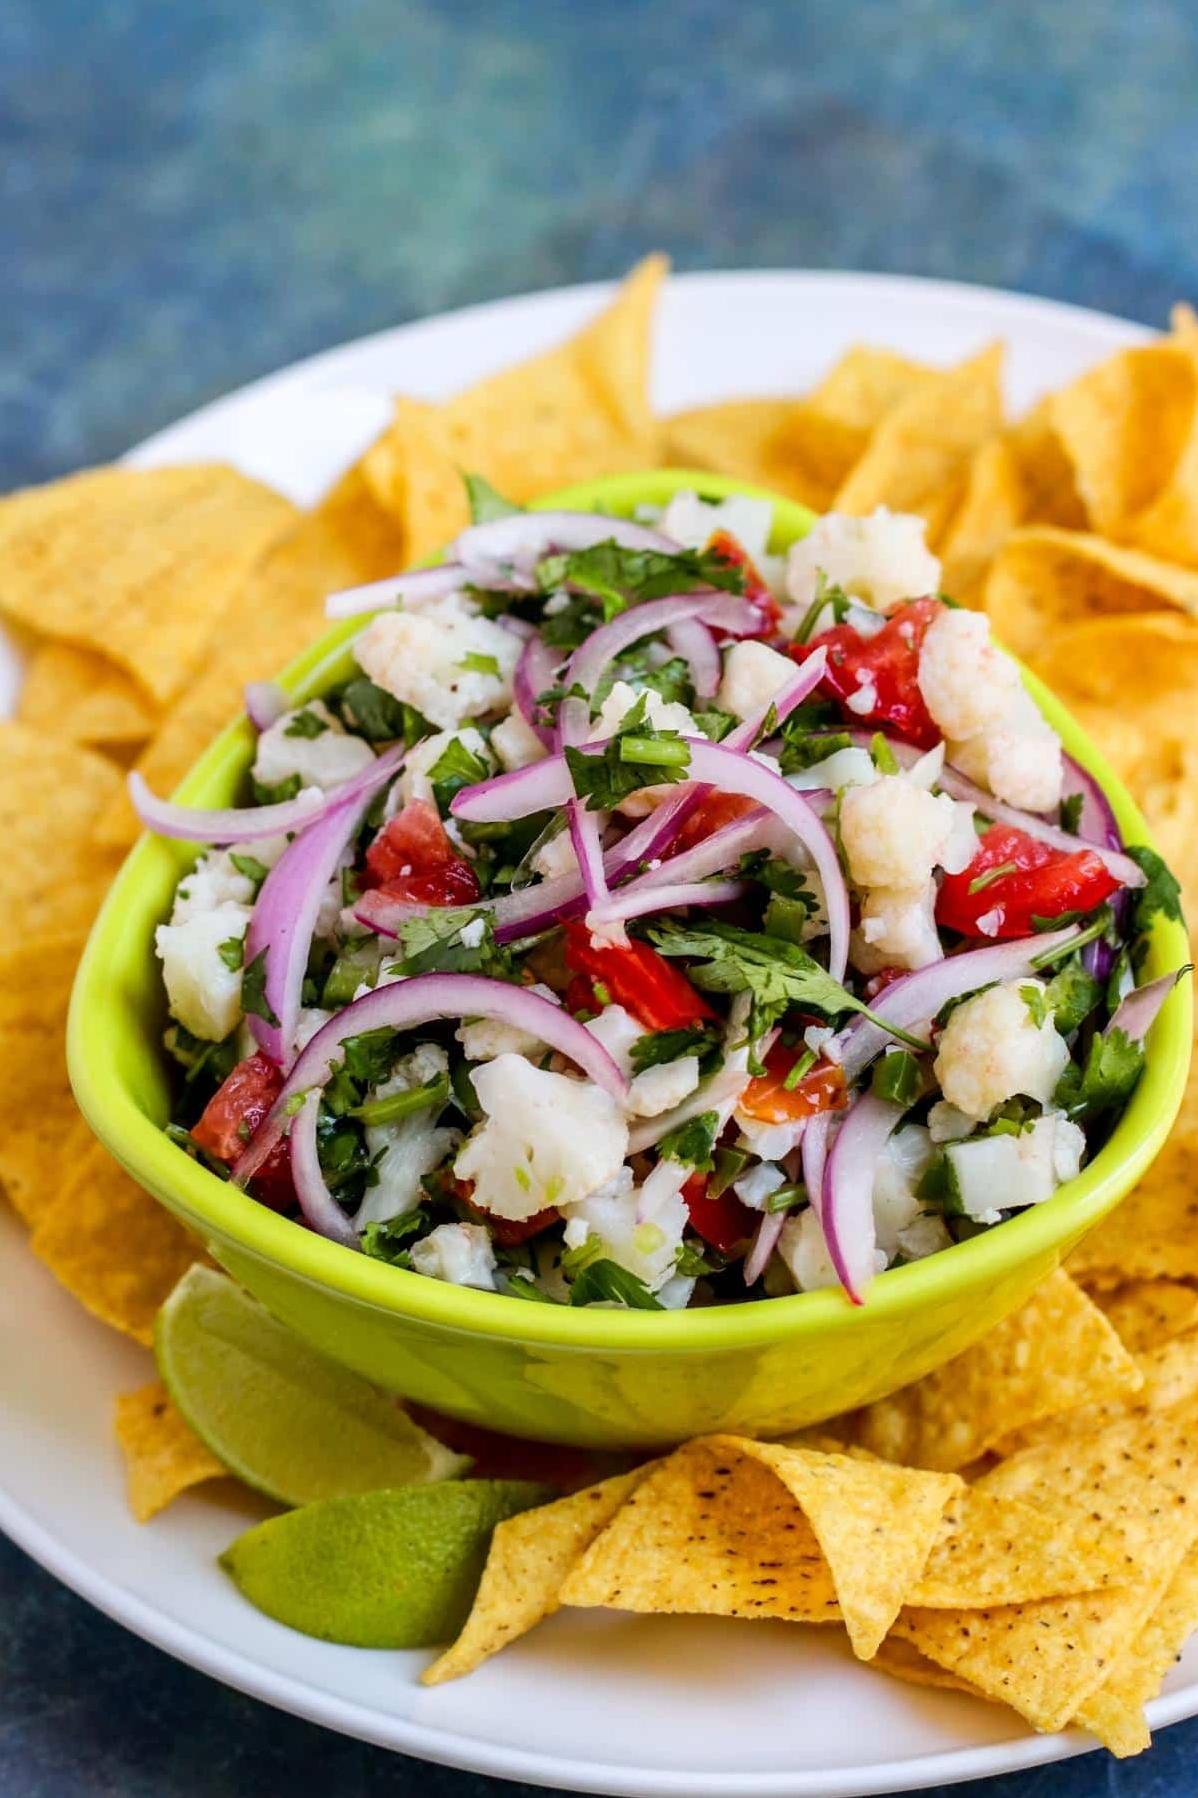  Looking for a healthy appetizer? Look no further than this cauliflower ceviche.